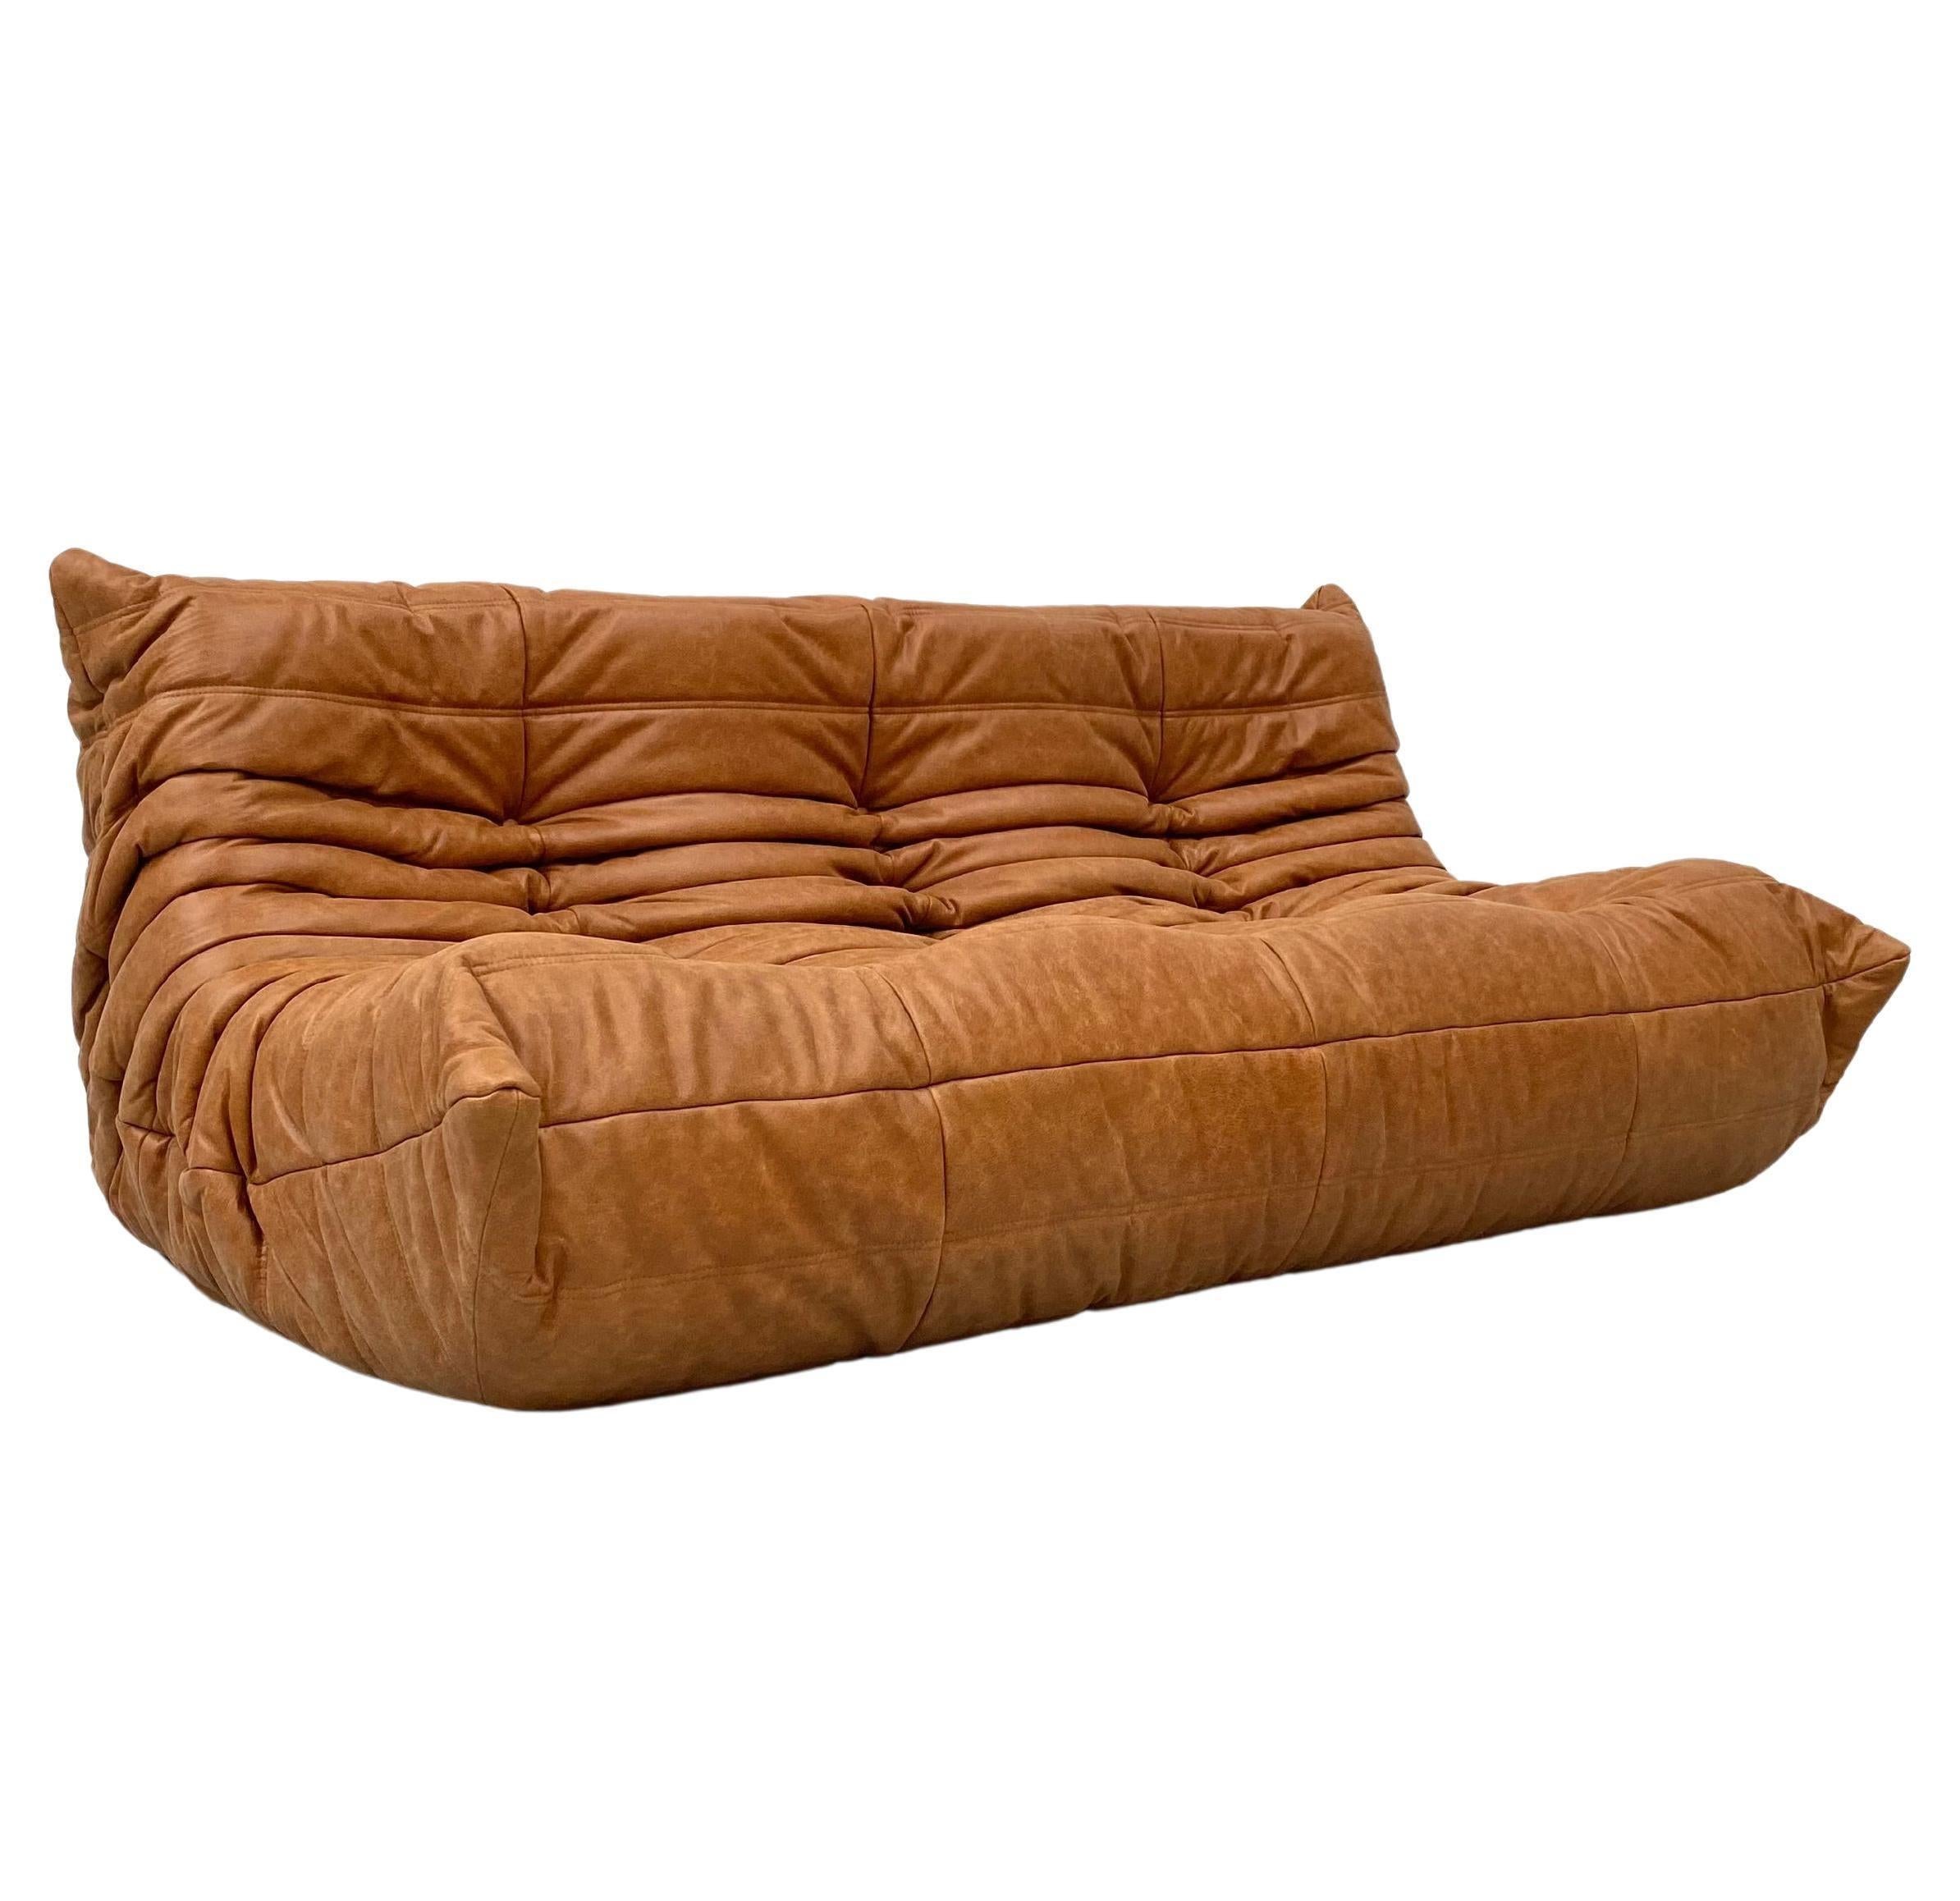 Mid-Century Modern French Vintage Togo Sofa in Cognac Leather by Michel Ducaroy for Ligne Roset